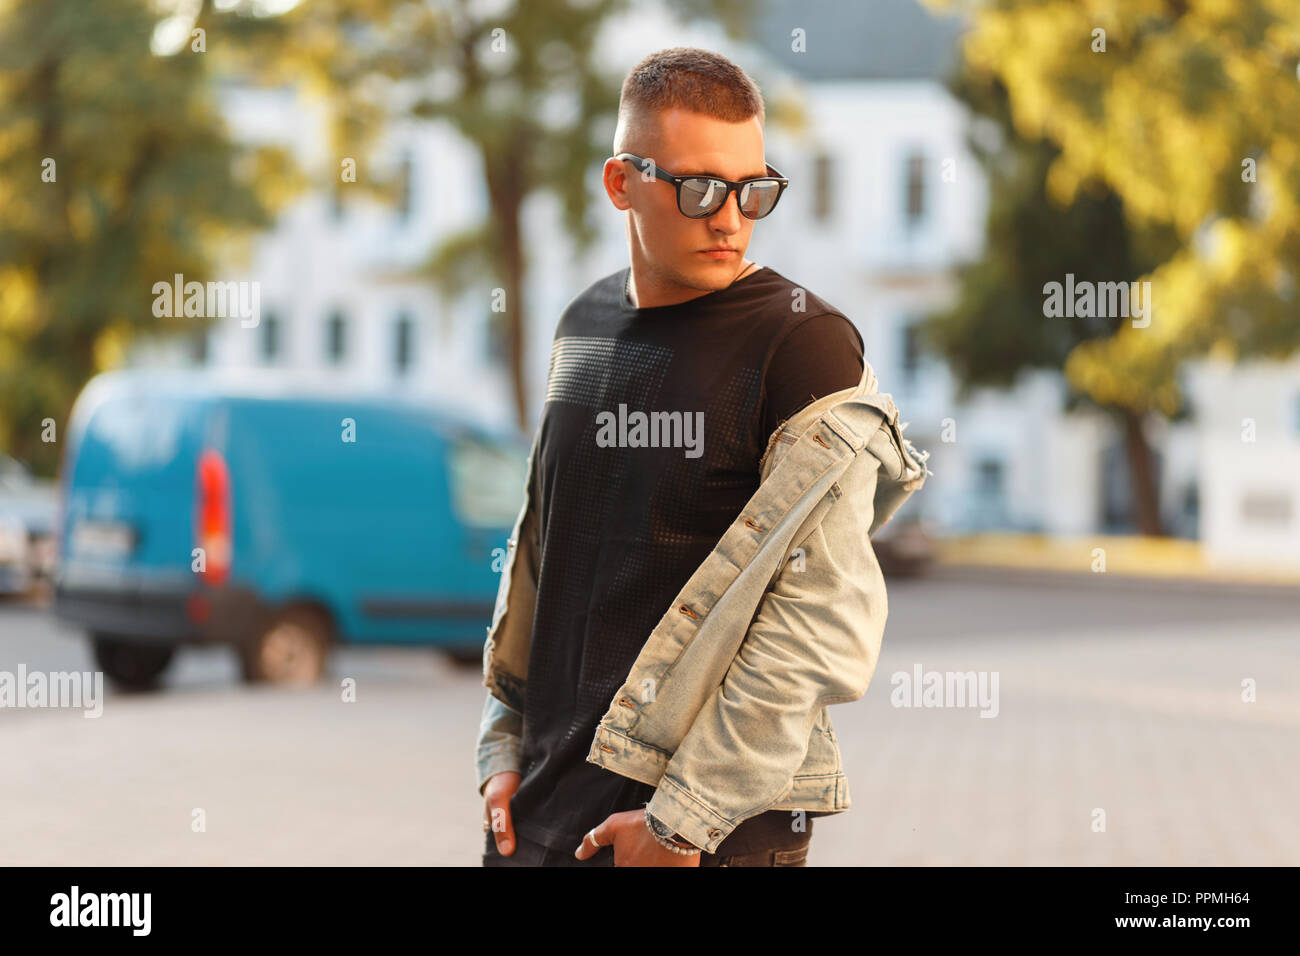 Fashionable model of a man with a hairstyle in a black stylish T-shirt with a denim jacket posing in the city Stock Photo